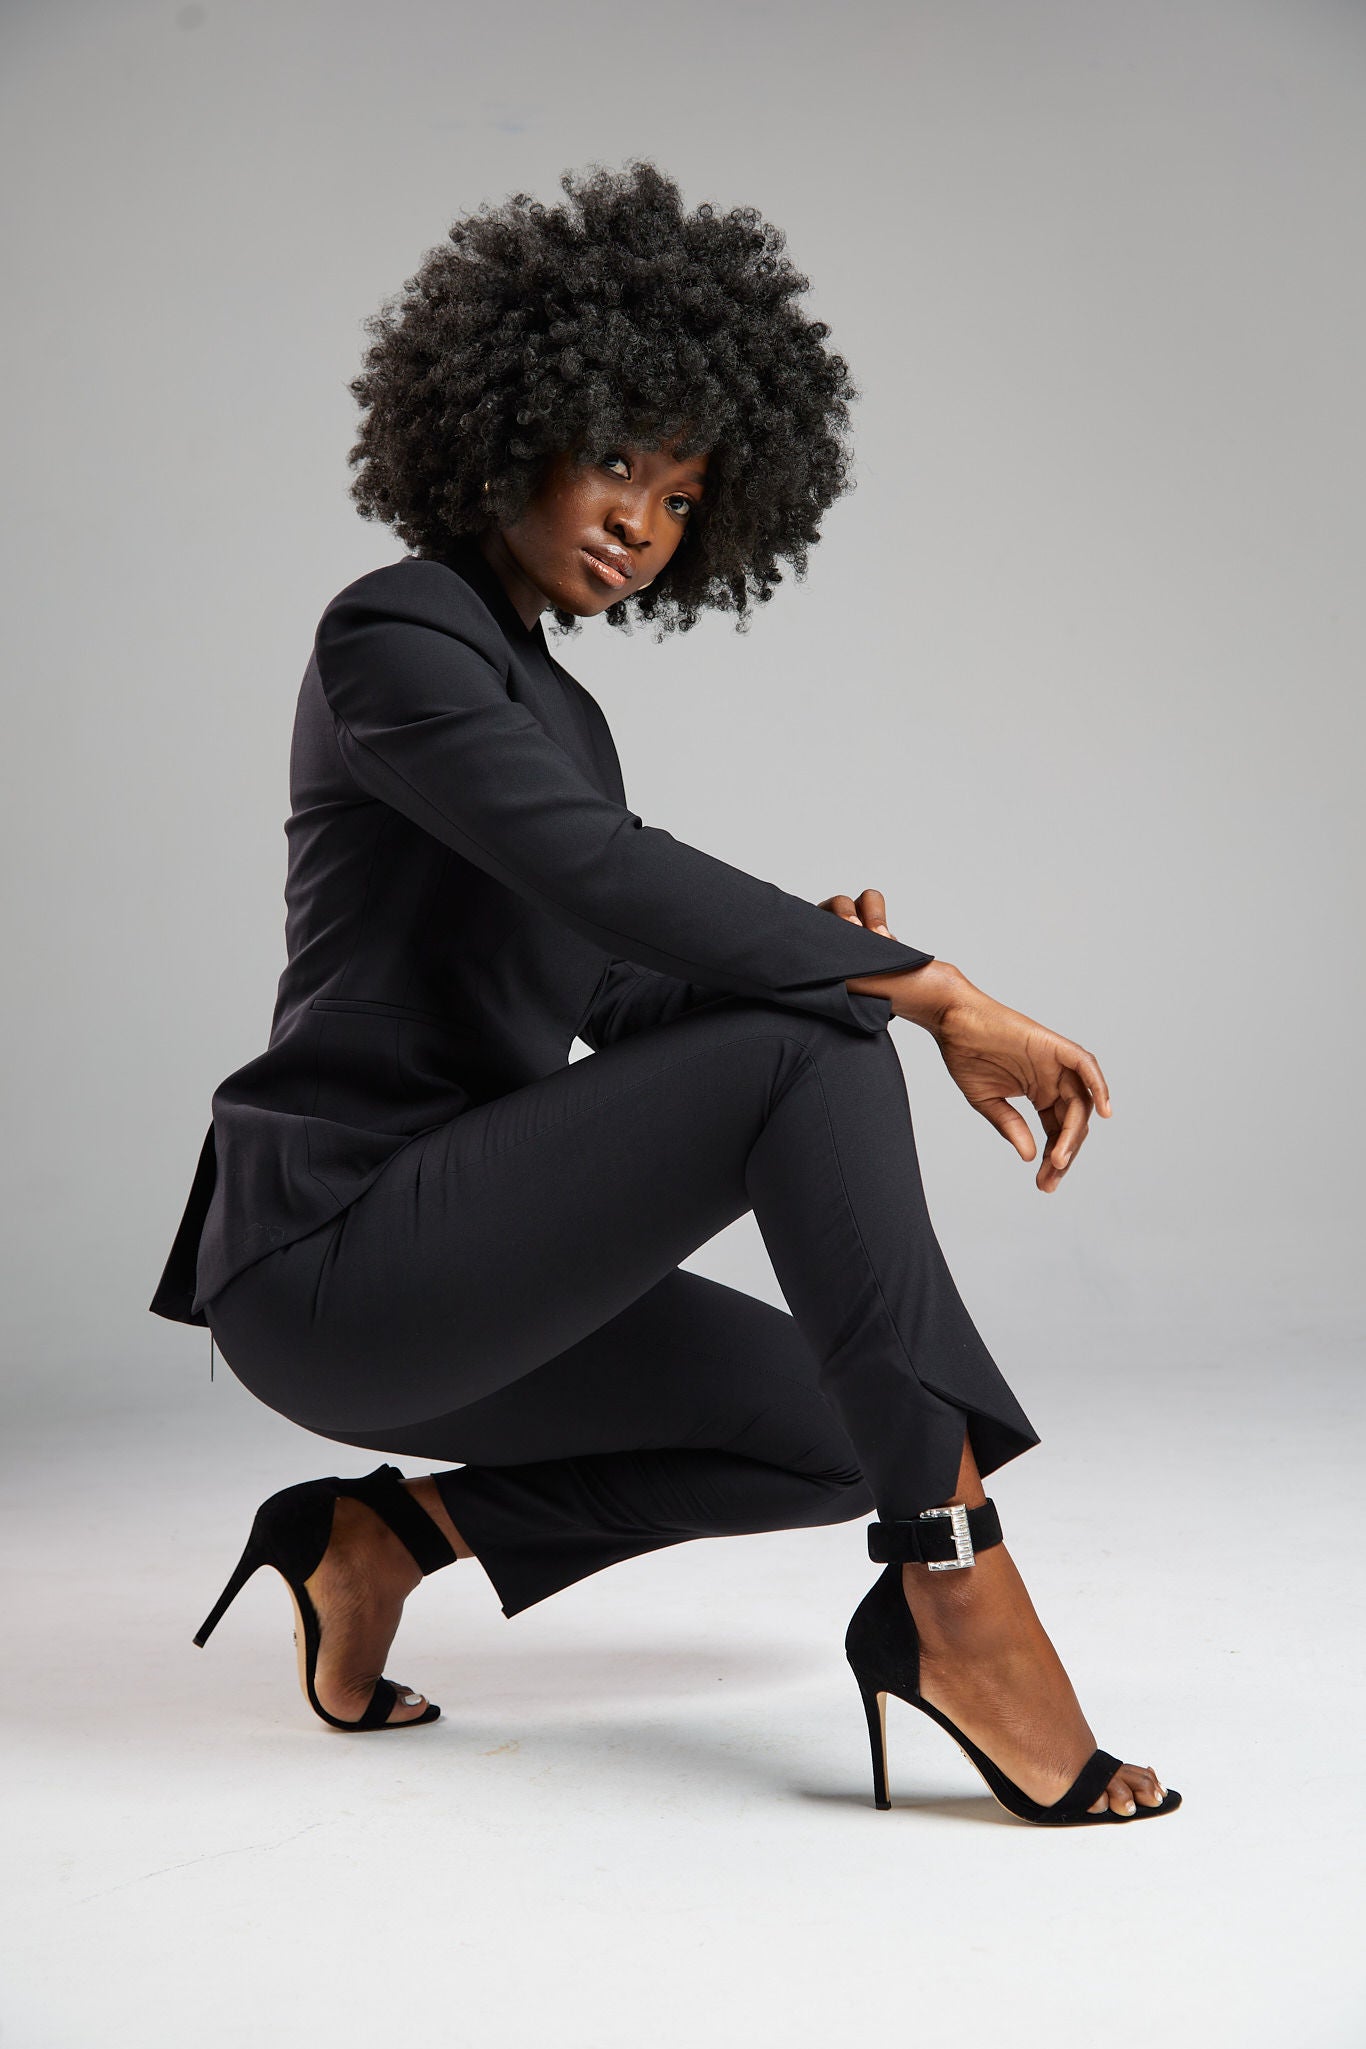 Women's pant suits with their distinctive ankle pyramid cut. Expertly crafted from Italian extra fine merino wool and elastane. Ideal for business meetings or casual wear.